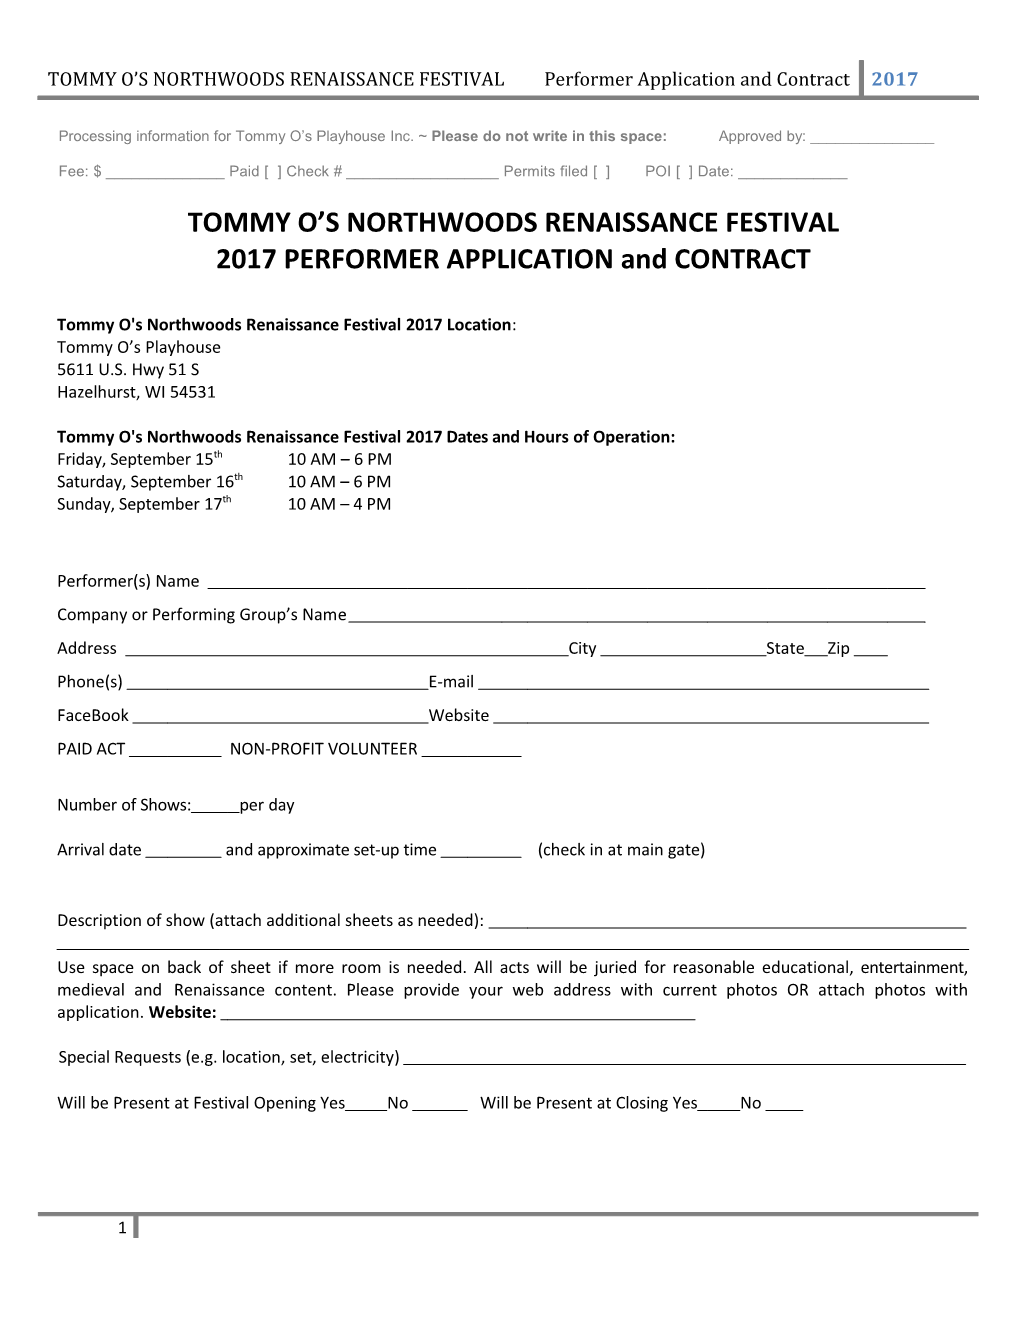 TOMMY O S NORTHWOODS RENAISSANCE FESTIVAL Vendor Application and Contract